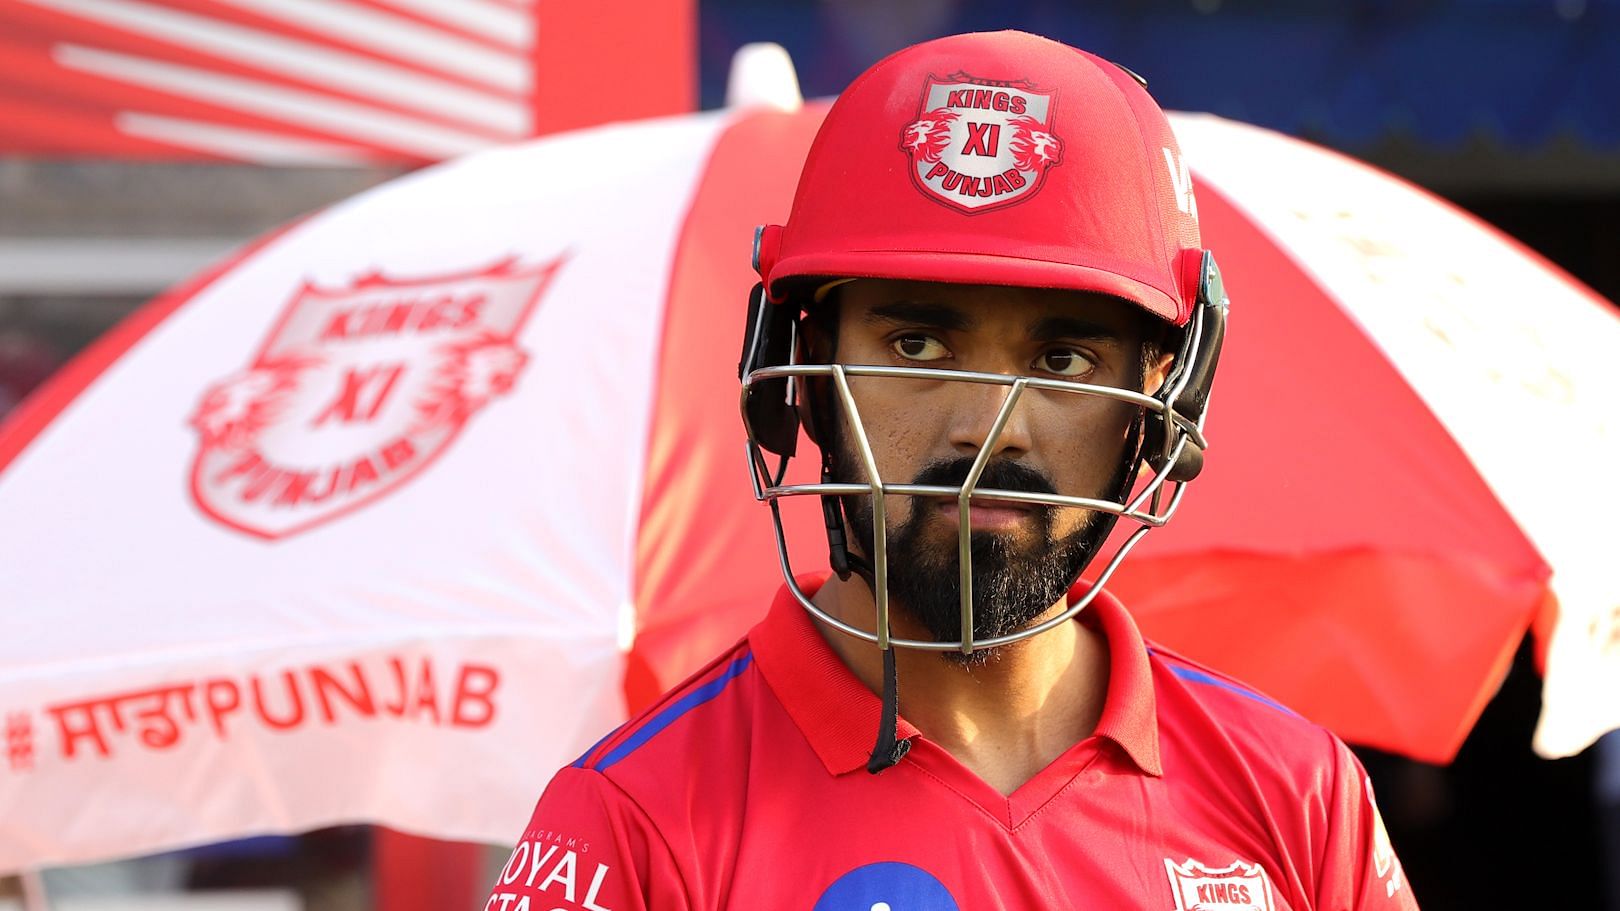 IPL 2020, Kings XI Punjab preview: Squad, fixtures, strengths, weaknesses  and more